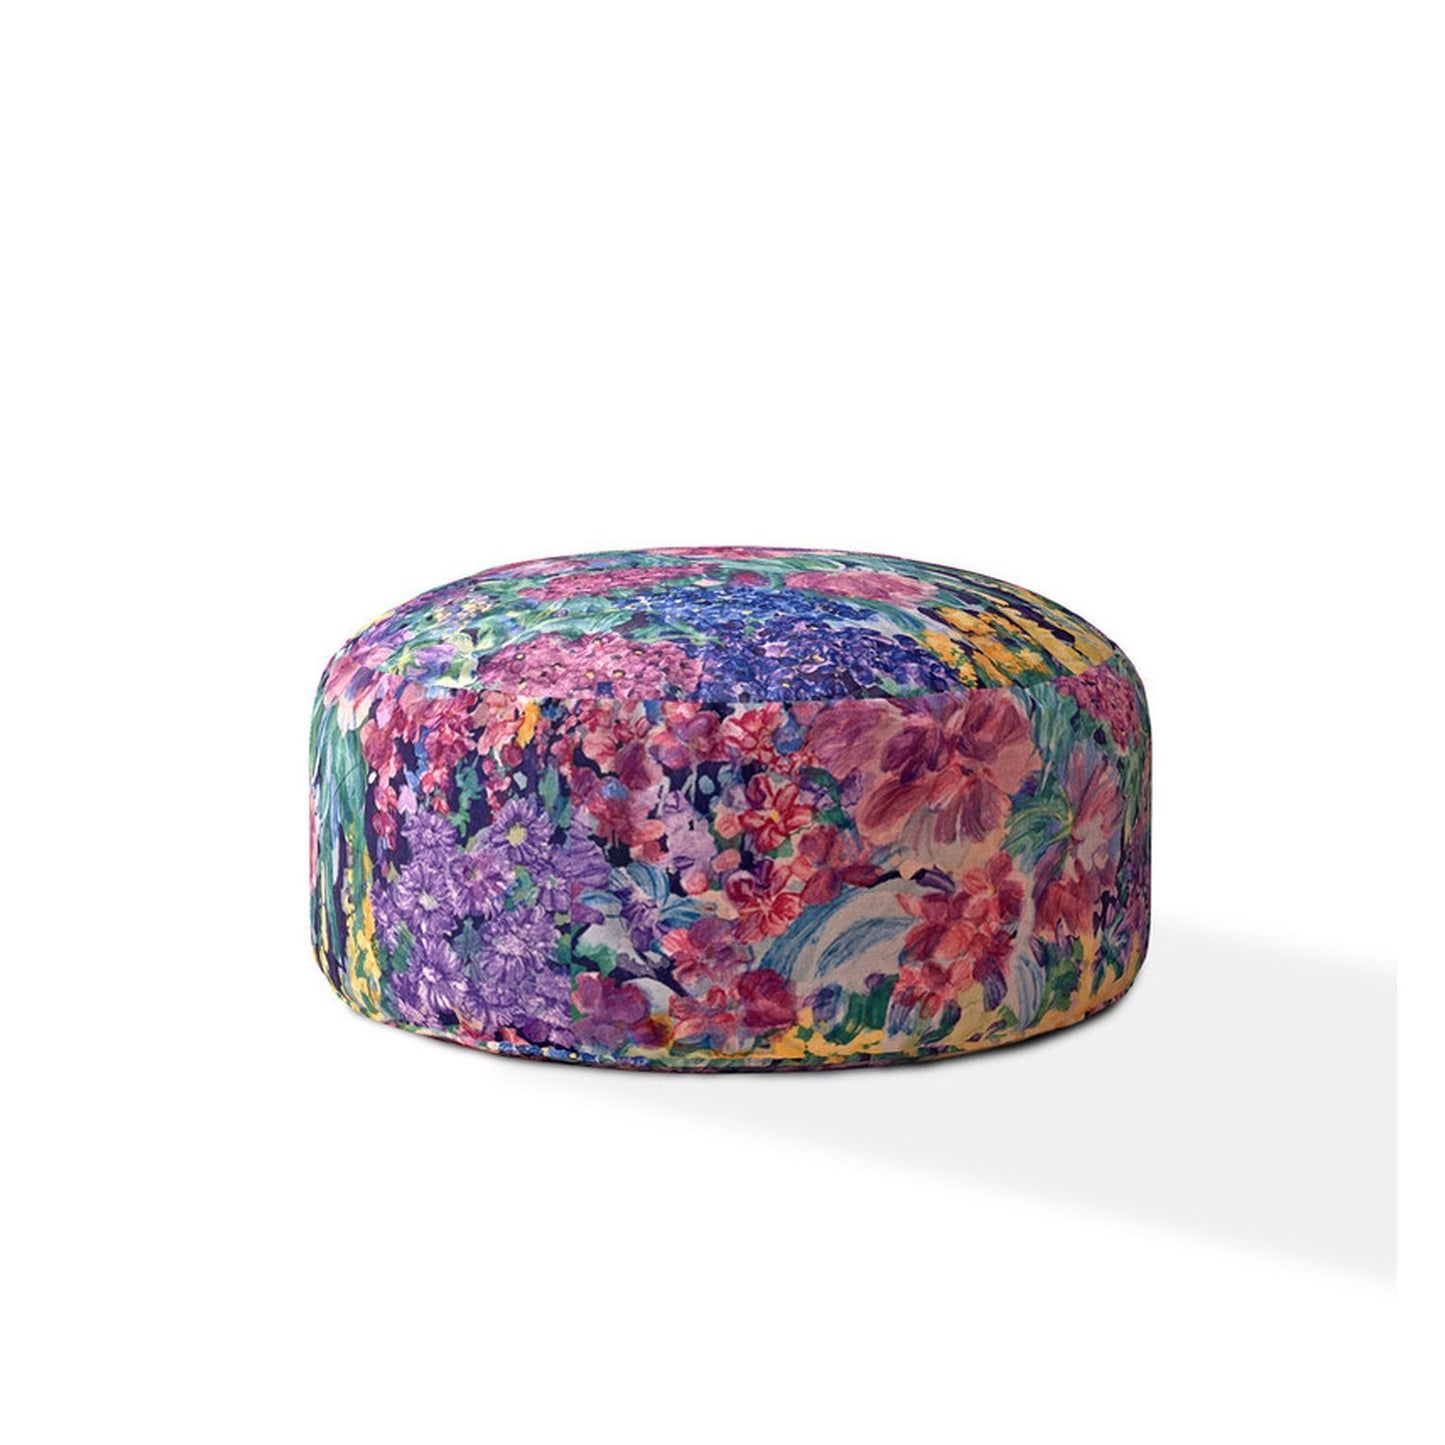 Indoor SPRING GARDEN Multi Round Zipper Pouf - Cover Only - 24in dia x 20in tall